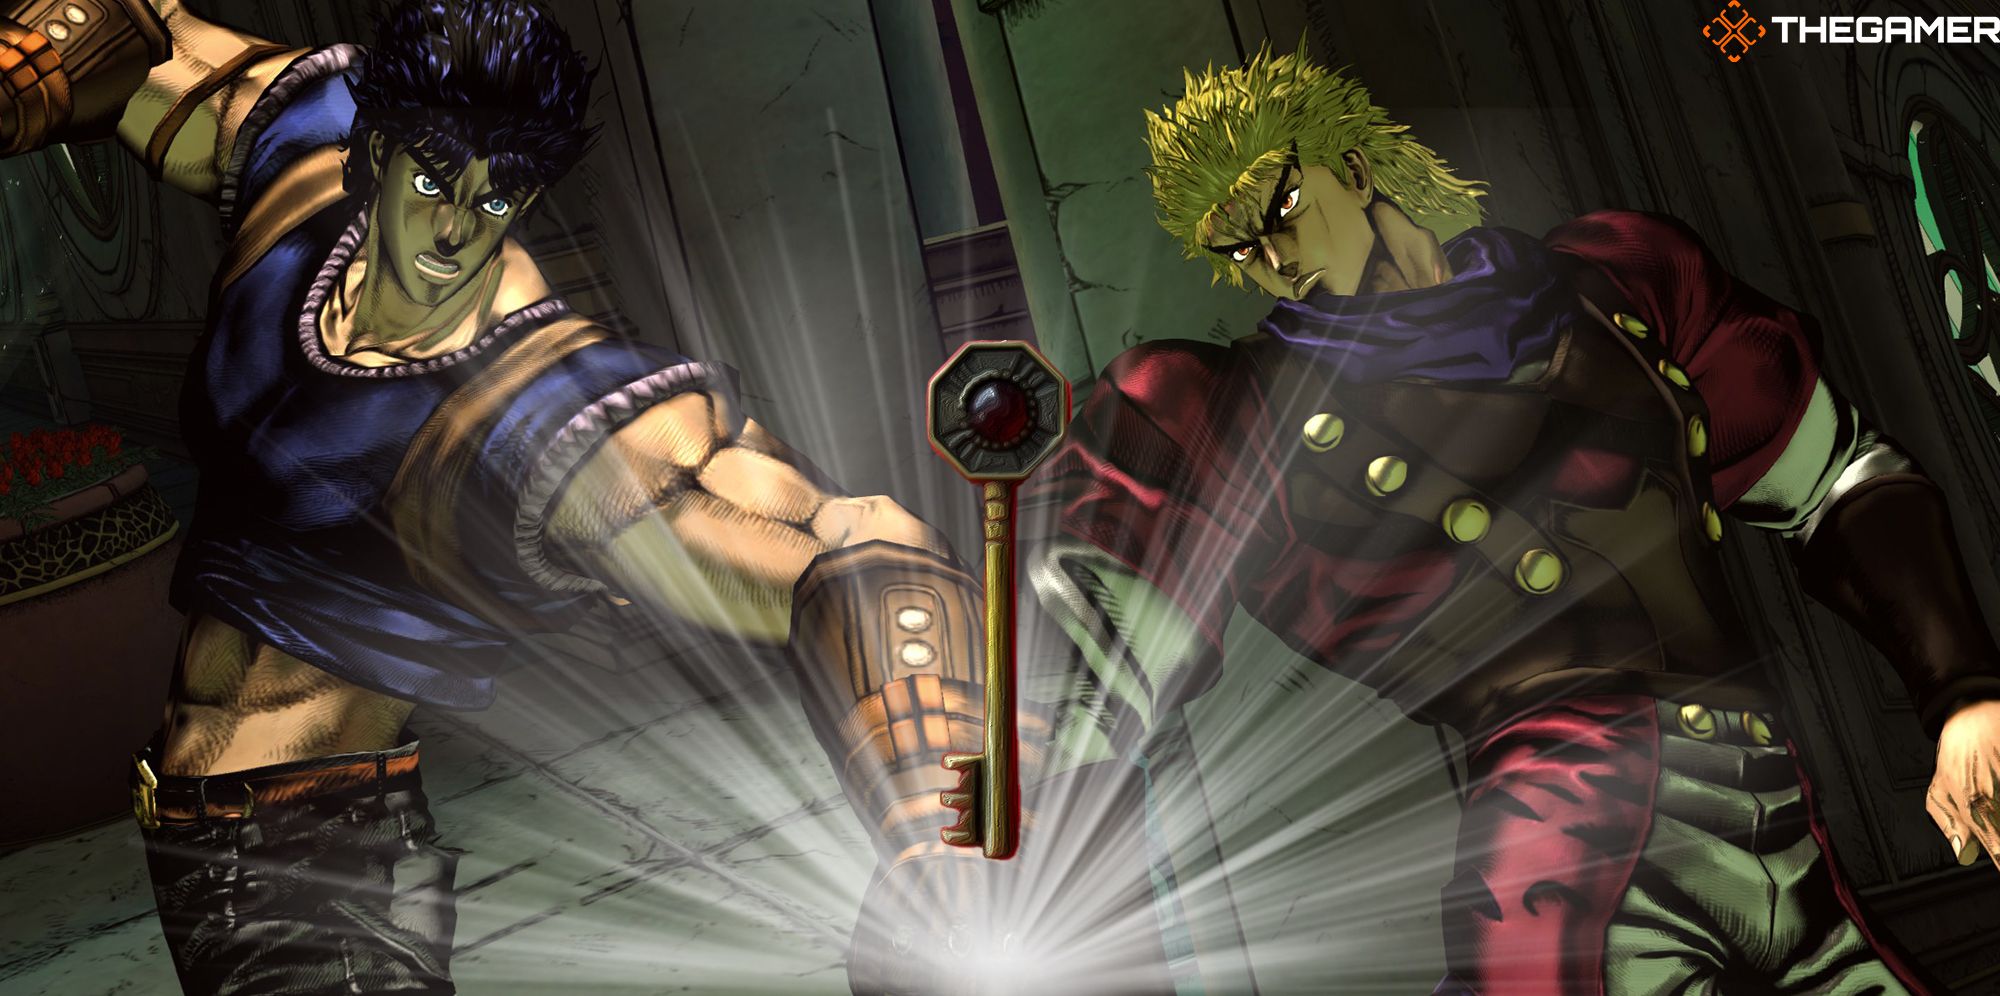 A Golden Wind key shines in front of Jonathan Joestar and Dio Brando in a custom image for Jojo's Bizarre Adventure ASBR.